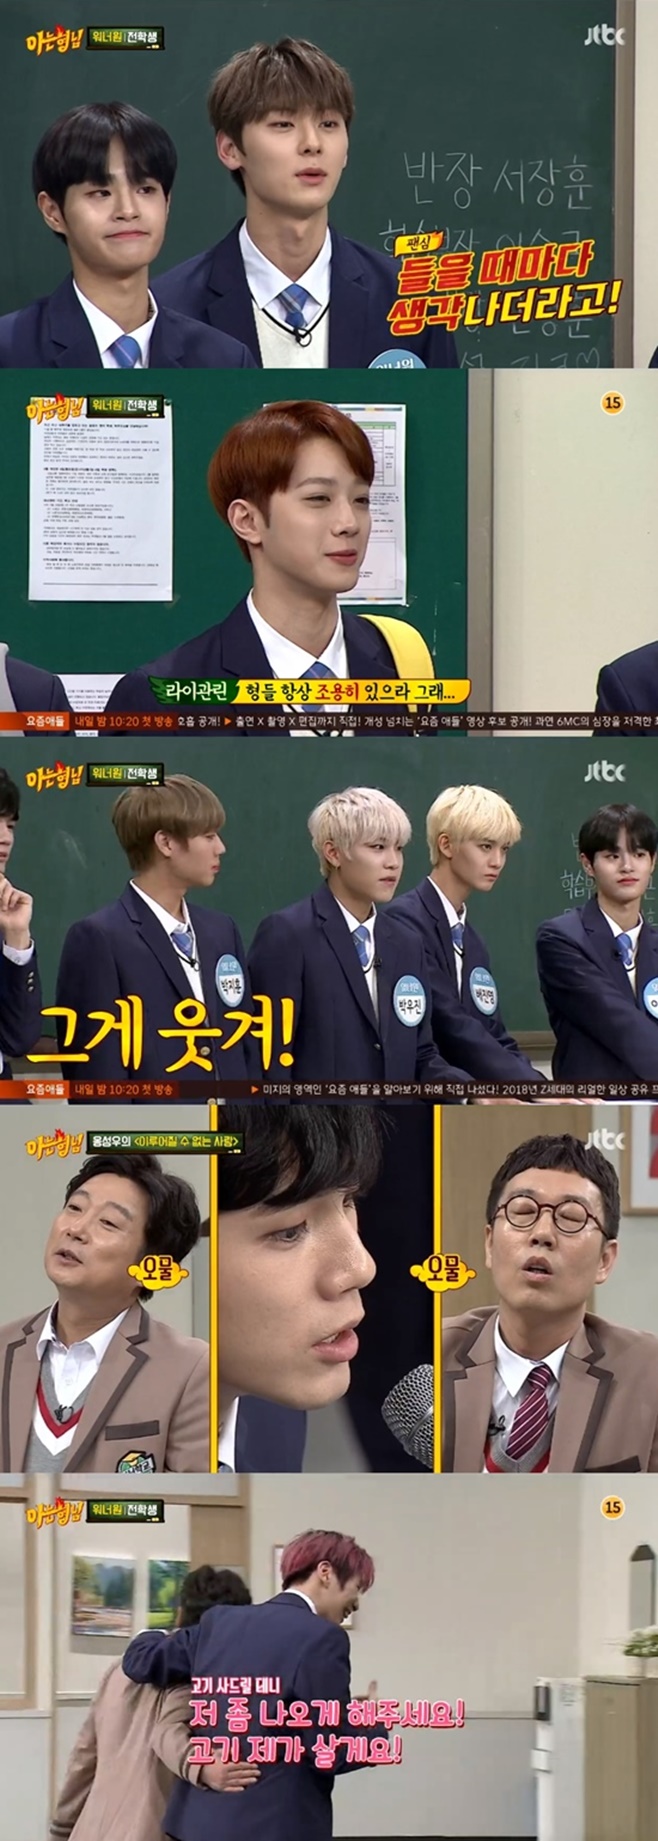 Wanna One showed a more advanced sense of entertainment in Knowing BrosWanna One members appeared as guests on JTBC entertainment program Knowing Bros, which aired on the 1st.Wanna One, who visited Knowing Bros again in eight months, was delighted to reunite with Knowing Bros members.Wanna One Li Kwanlin appeared in the words Kang Ho-dong Najimarae.Ong Sung-woo laughed when he said that he wanted to try Kang Ho-dong once because Rygwanlin was on the Knowing BrosHwang Min-hyun and Min Kyung Hoon had a talk that was affectionate enough to make their ears red.Hwang Min-hyun approached Min Kyung Hoon, improvisingly singing cowards. Hwang Min-hyun was red-eared all the way to the street.Lee Sang-min said that each others tone fits well and that it would be good to sing together at the concert, and then Hwang Min-hyun said it was an honor.Wanna One members each revealed their organs to members of Knowing Bros Ji-sung applied for a meringue match with Lee Sang-min.Lee Sang-min won by whipping with the power of a barely breathless half-hearted.Ong Sung-woo played an infinite repetition guitar and sang a song that had been practiced only a word, making viewers laugh.Kang Daniel has performed a variety of organs, from upgraded b-boying to hip bumps.I suggested that I guarantee to appear in one episode like Zico through a hip-twisting showdown, but unfortunately I lost to Knowing Bros members.After that, he made a big TMI by quizzing himself in the Get Me. Kang Daniel told him about what happened when he was in middle school because of his cool mother.He slept at school tired and woke up at 10 p.m. and got up to the schoolteacher, but Kang Daniels mother didnt answer the phone.Wanna One came back to Knowing Bros in eight months and showed energy throughout the shoot.With a more powerful sense of entertainment, I grabbed the members of Knowing Bros